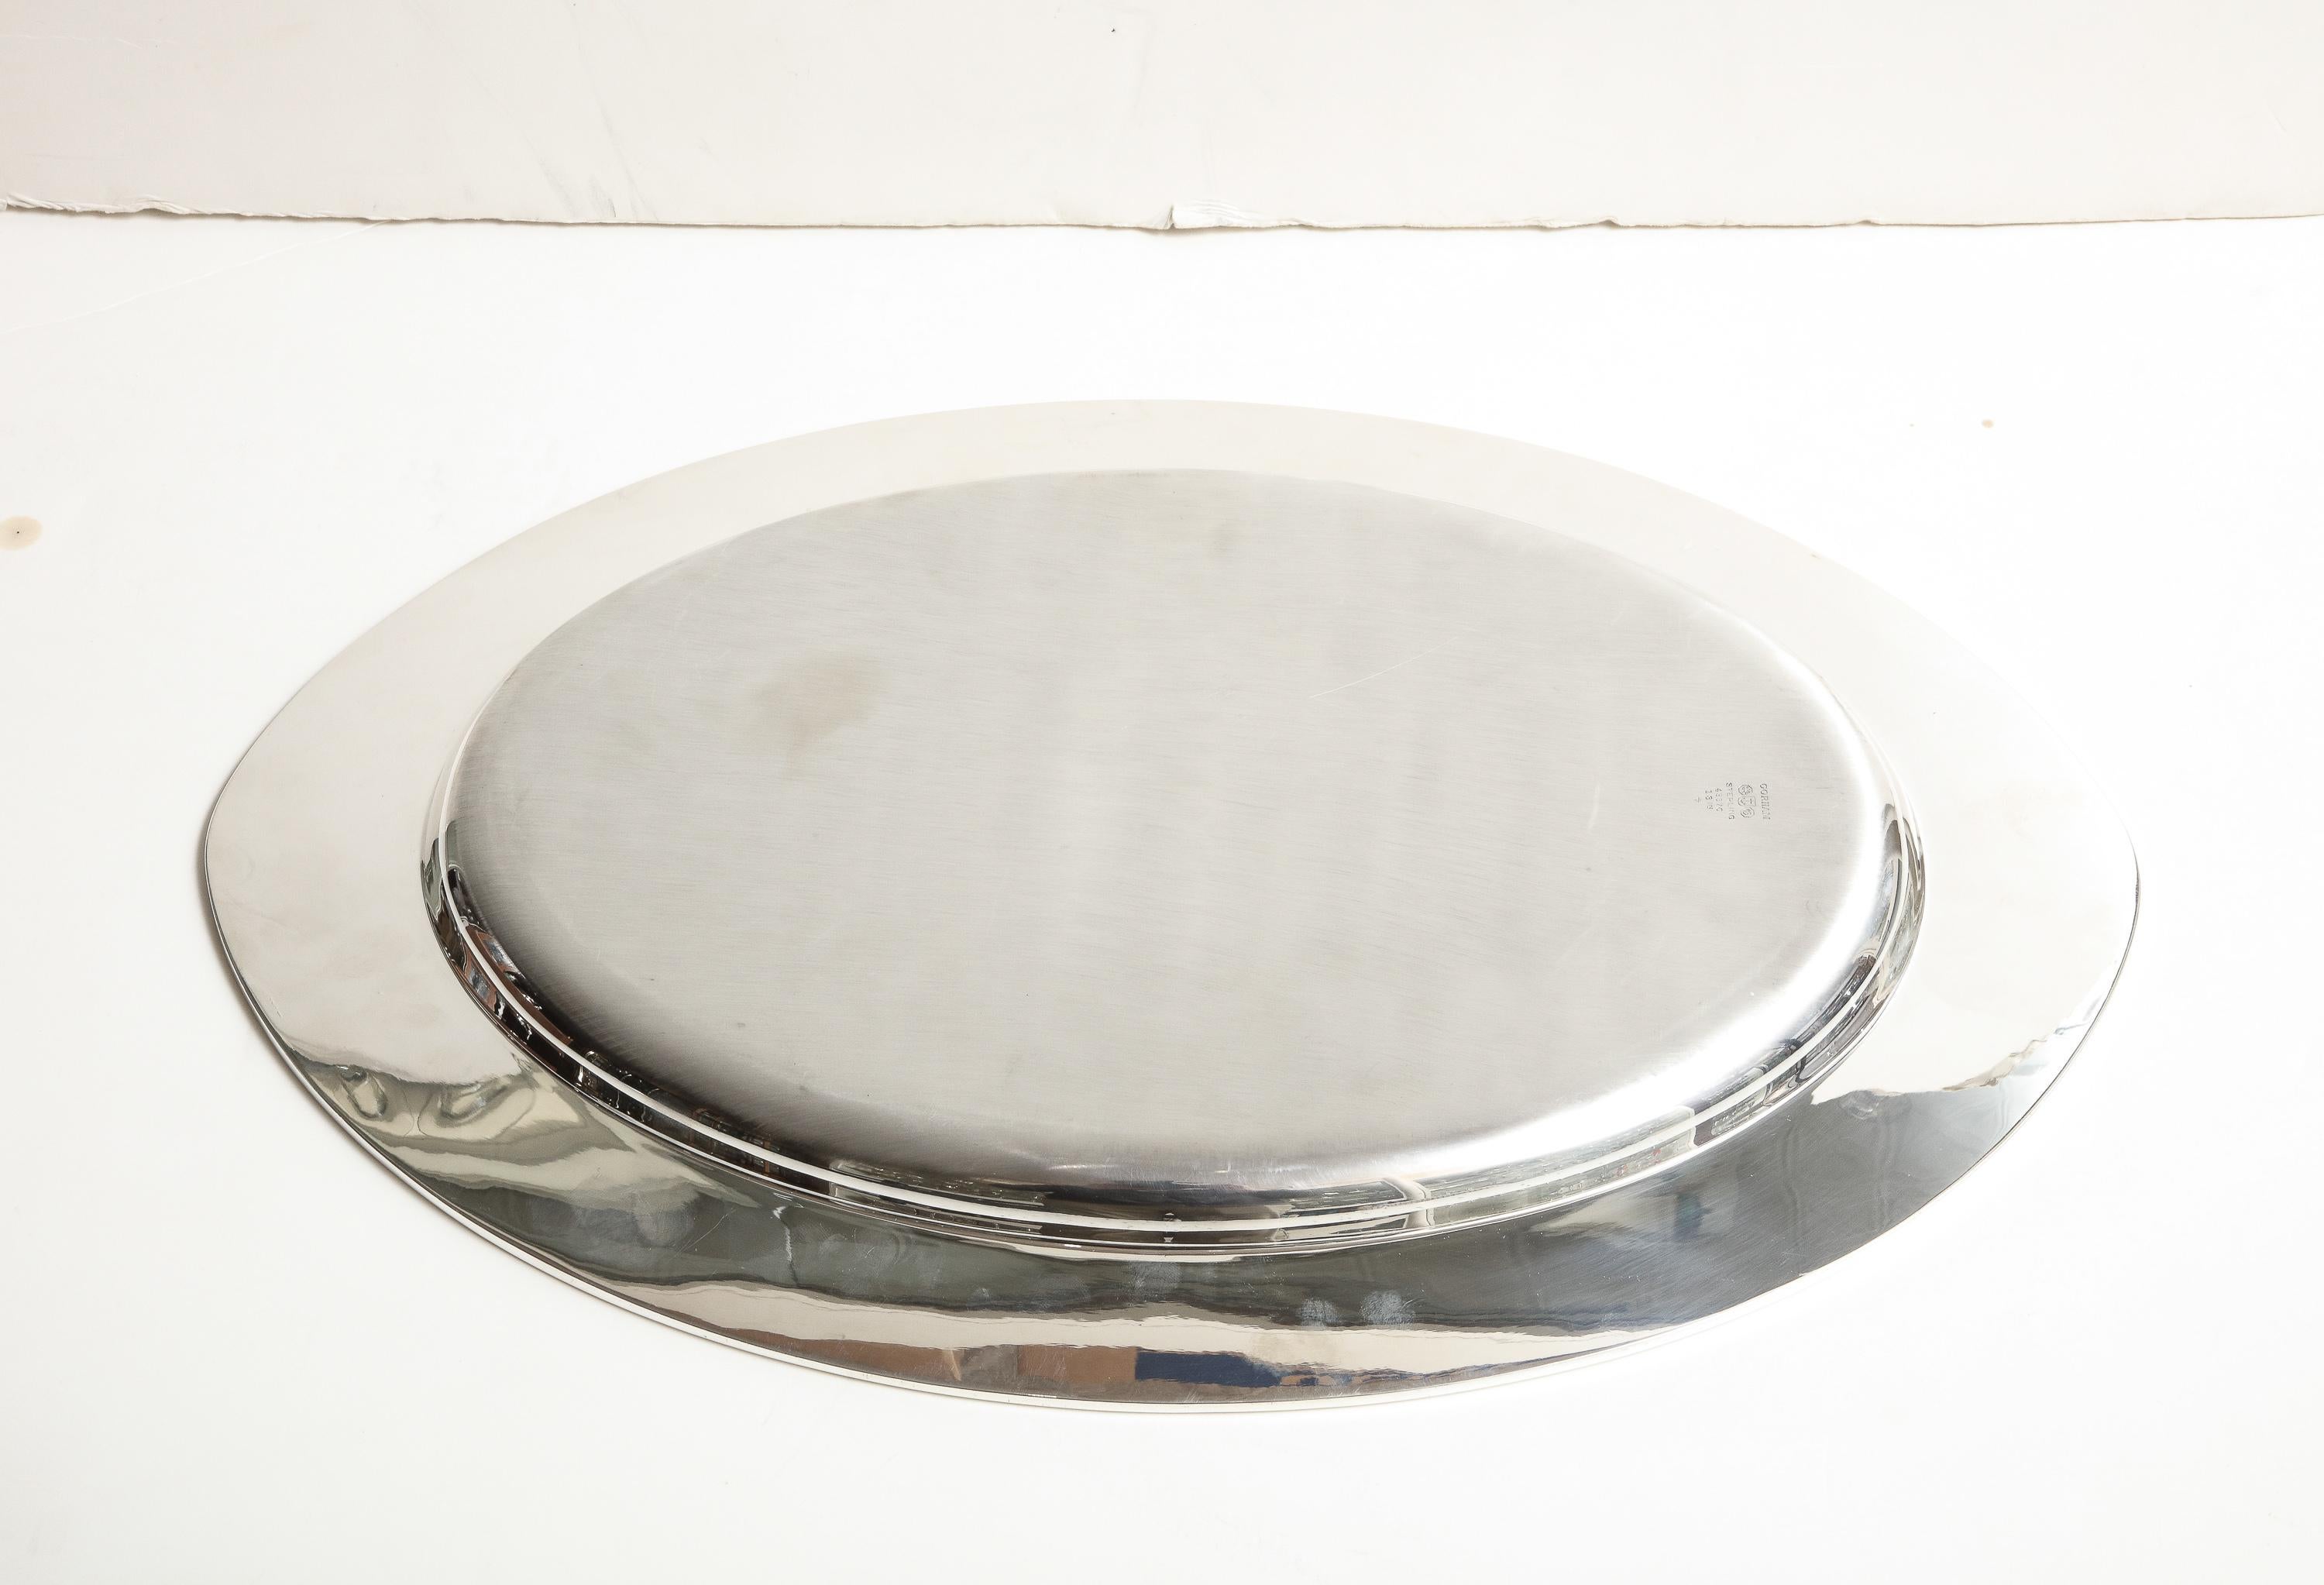 Large Art Deco Period Solid Sterling Silver Serving Platter By Gorham For Sale 6